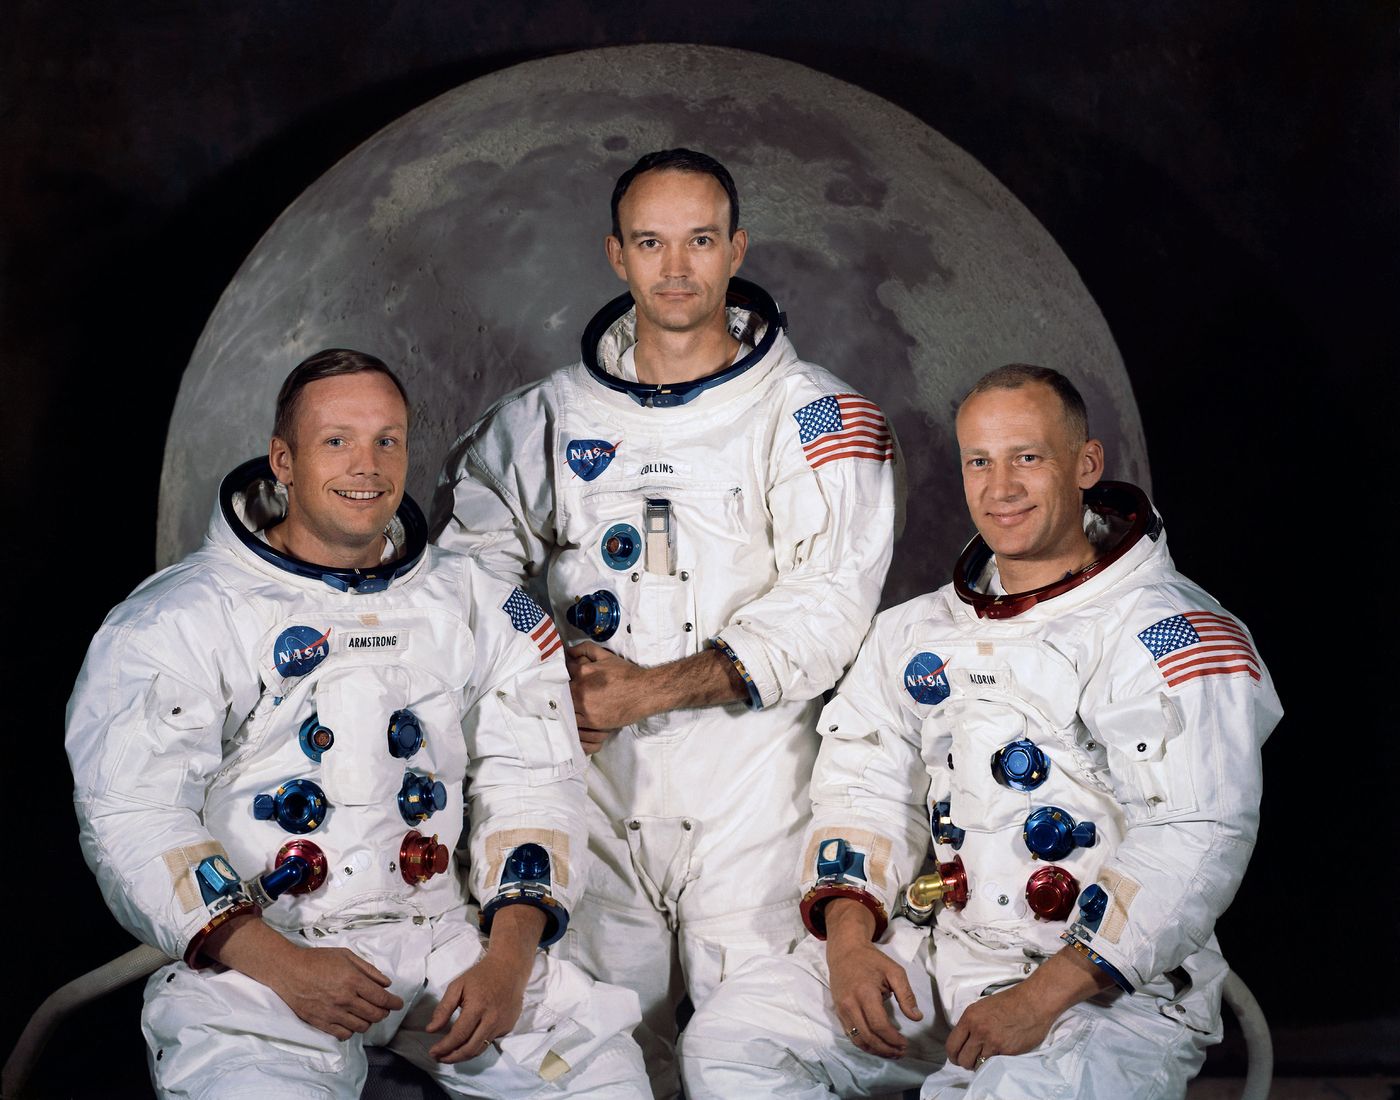 Apollo 11 crew, who made the first manned landing: commander Neil Armstrong, CM pilot Michael Collins, and LM pilot Buzz Aldrin